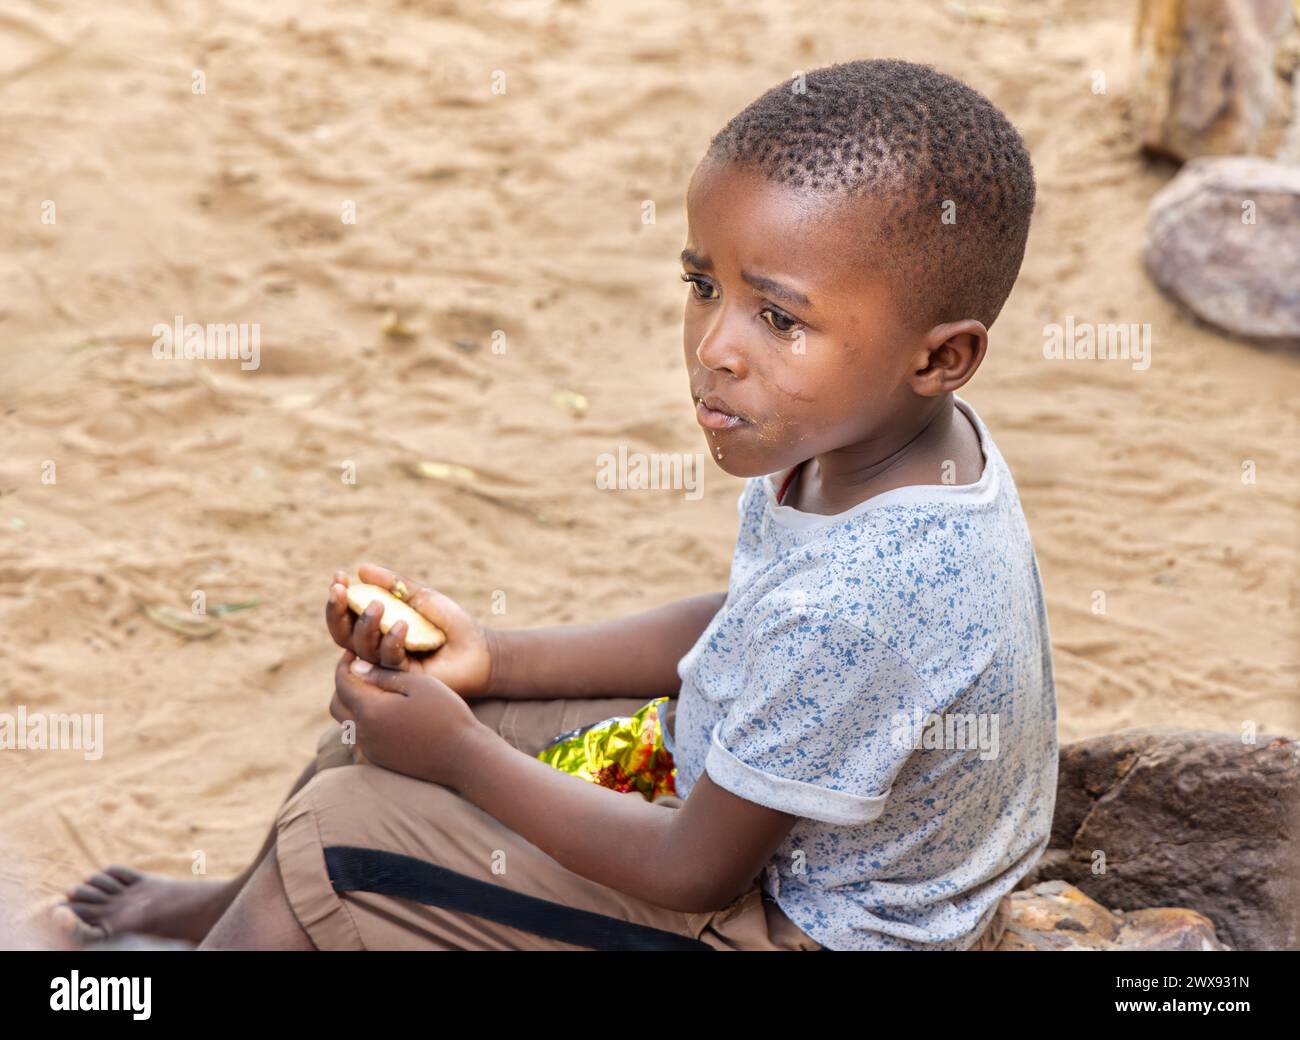 world famine , hungry african boy eating biscuits in the empty road, ngo social workers helping Stock Photo